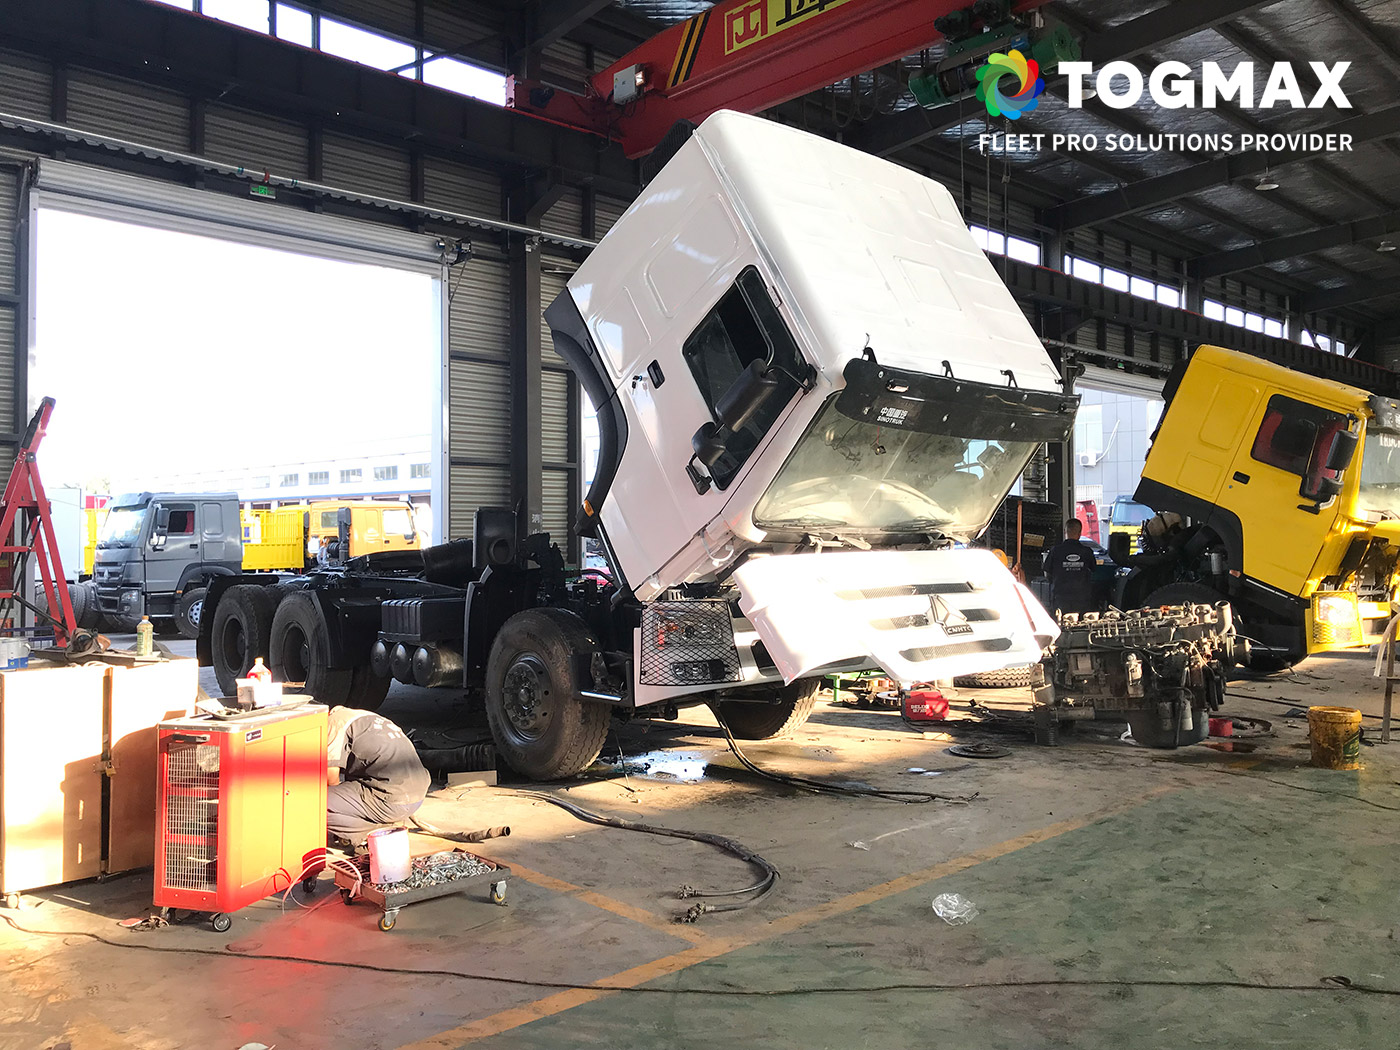 Togmax Group China Sinotruk Howo Shacman Secondhand Used Tractors Trucks Factory Workshop